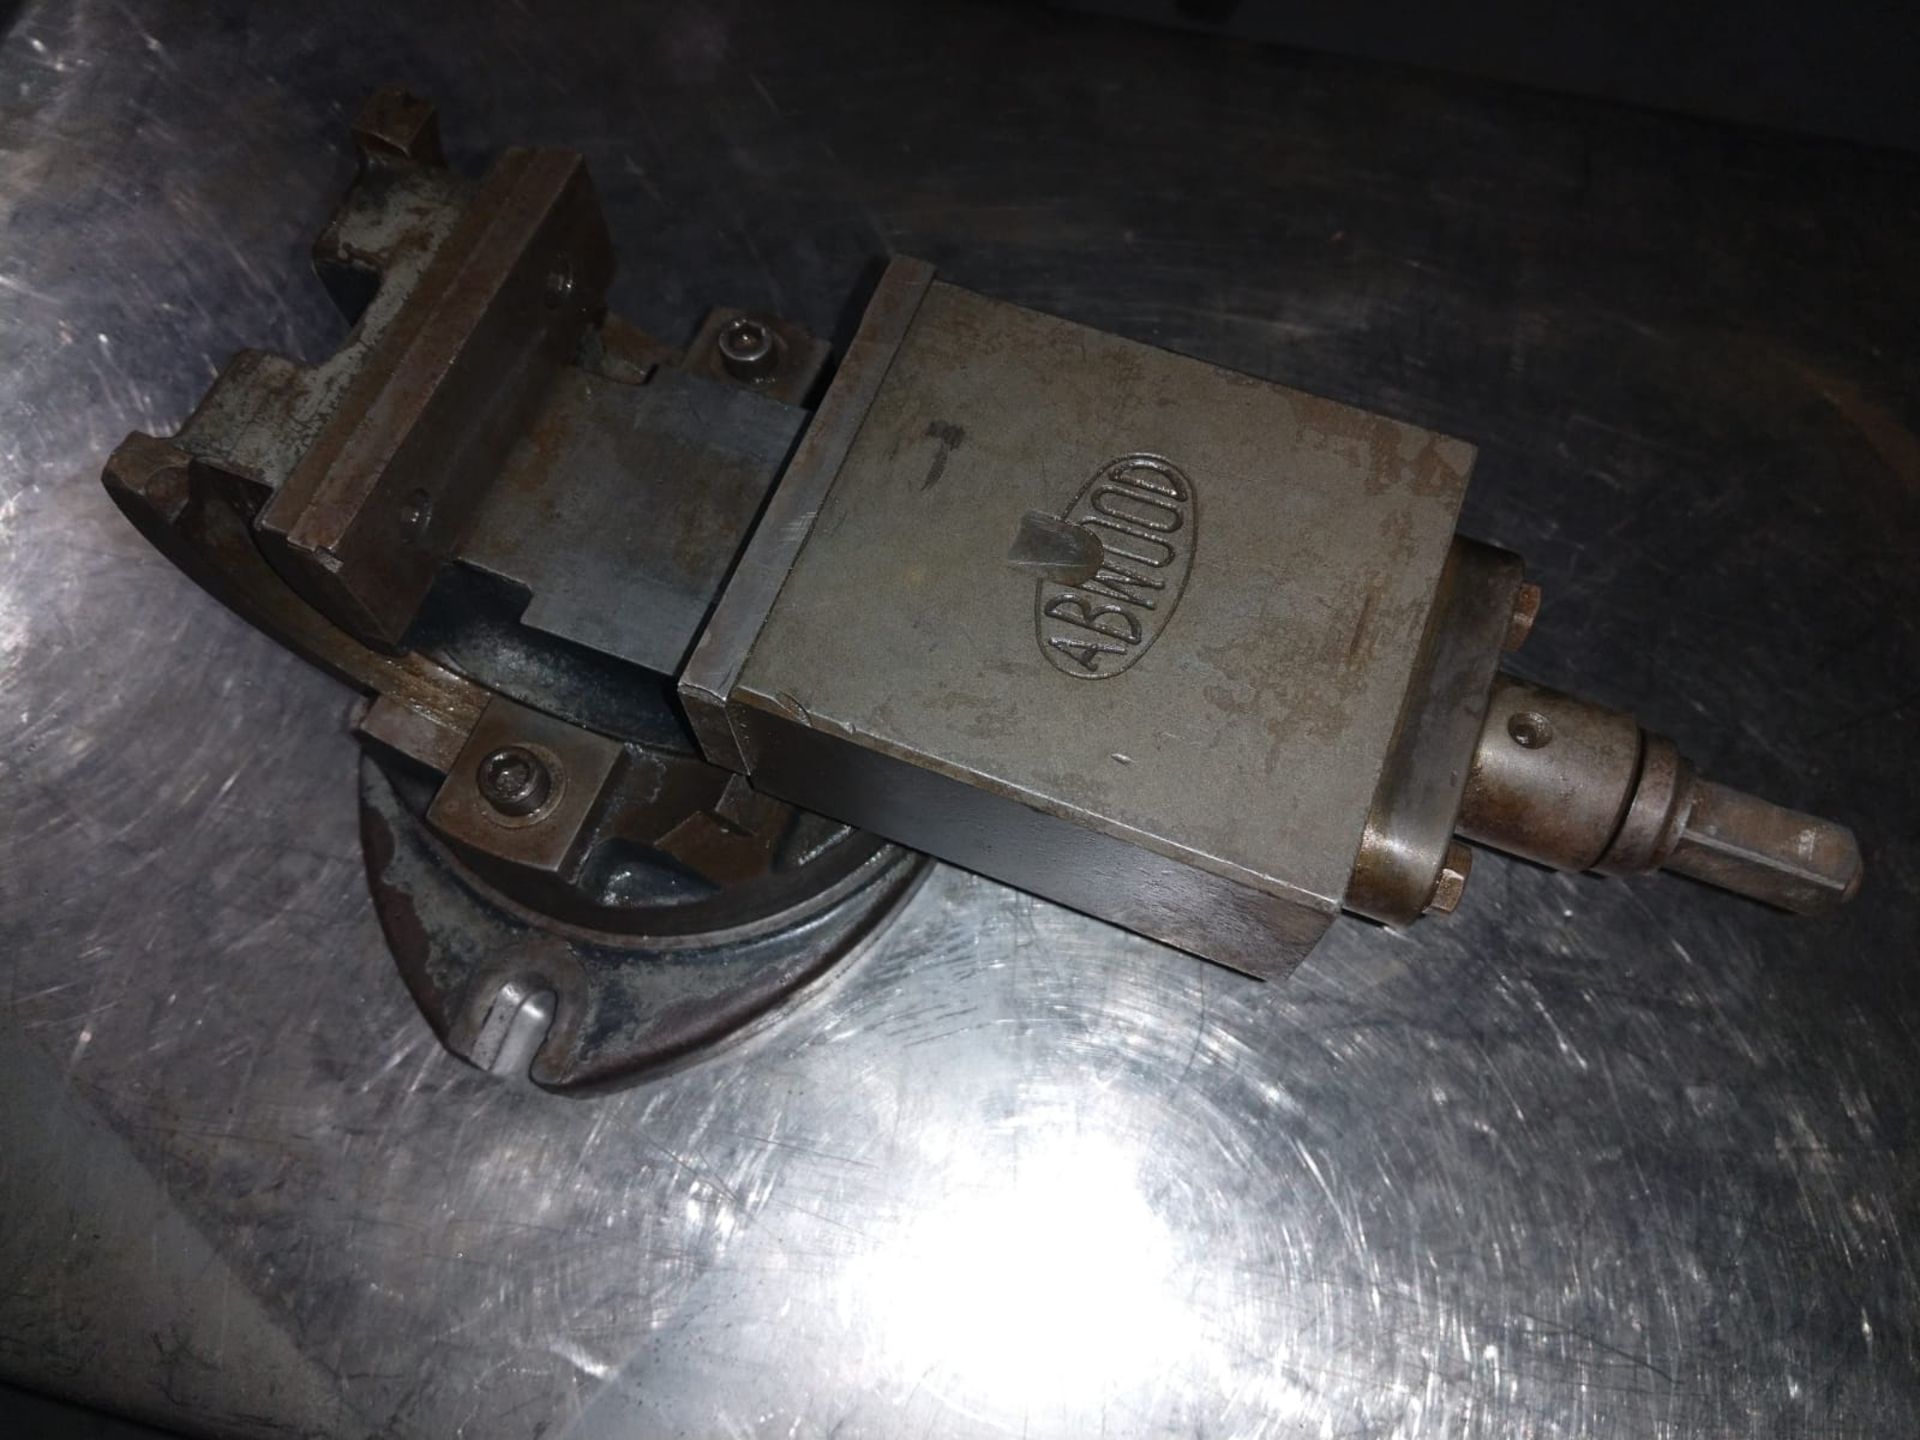 ABWOOD SWIVEL AND TILT MACHINE VICE, 4 INCH JAWS, IN WORKING ORDER *NO VAT* - Image 5 of 5